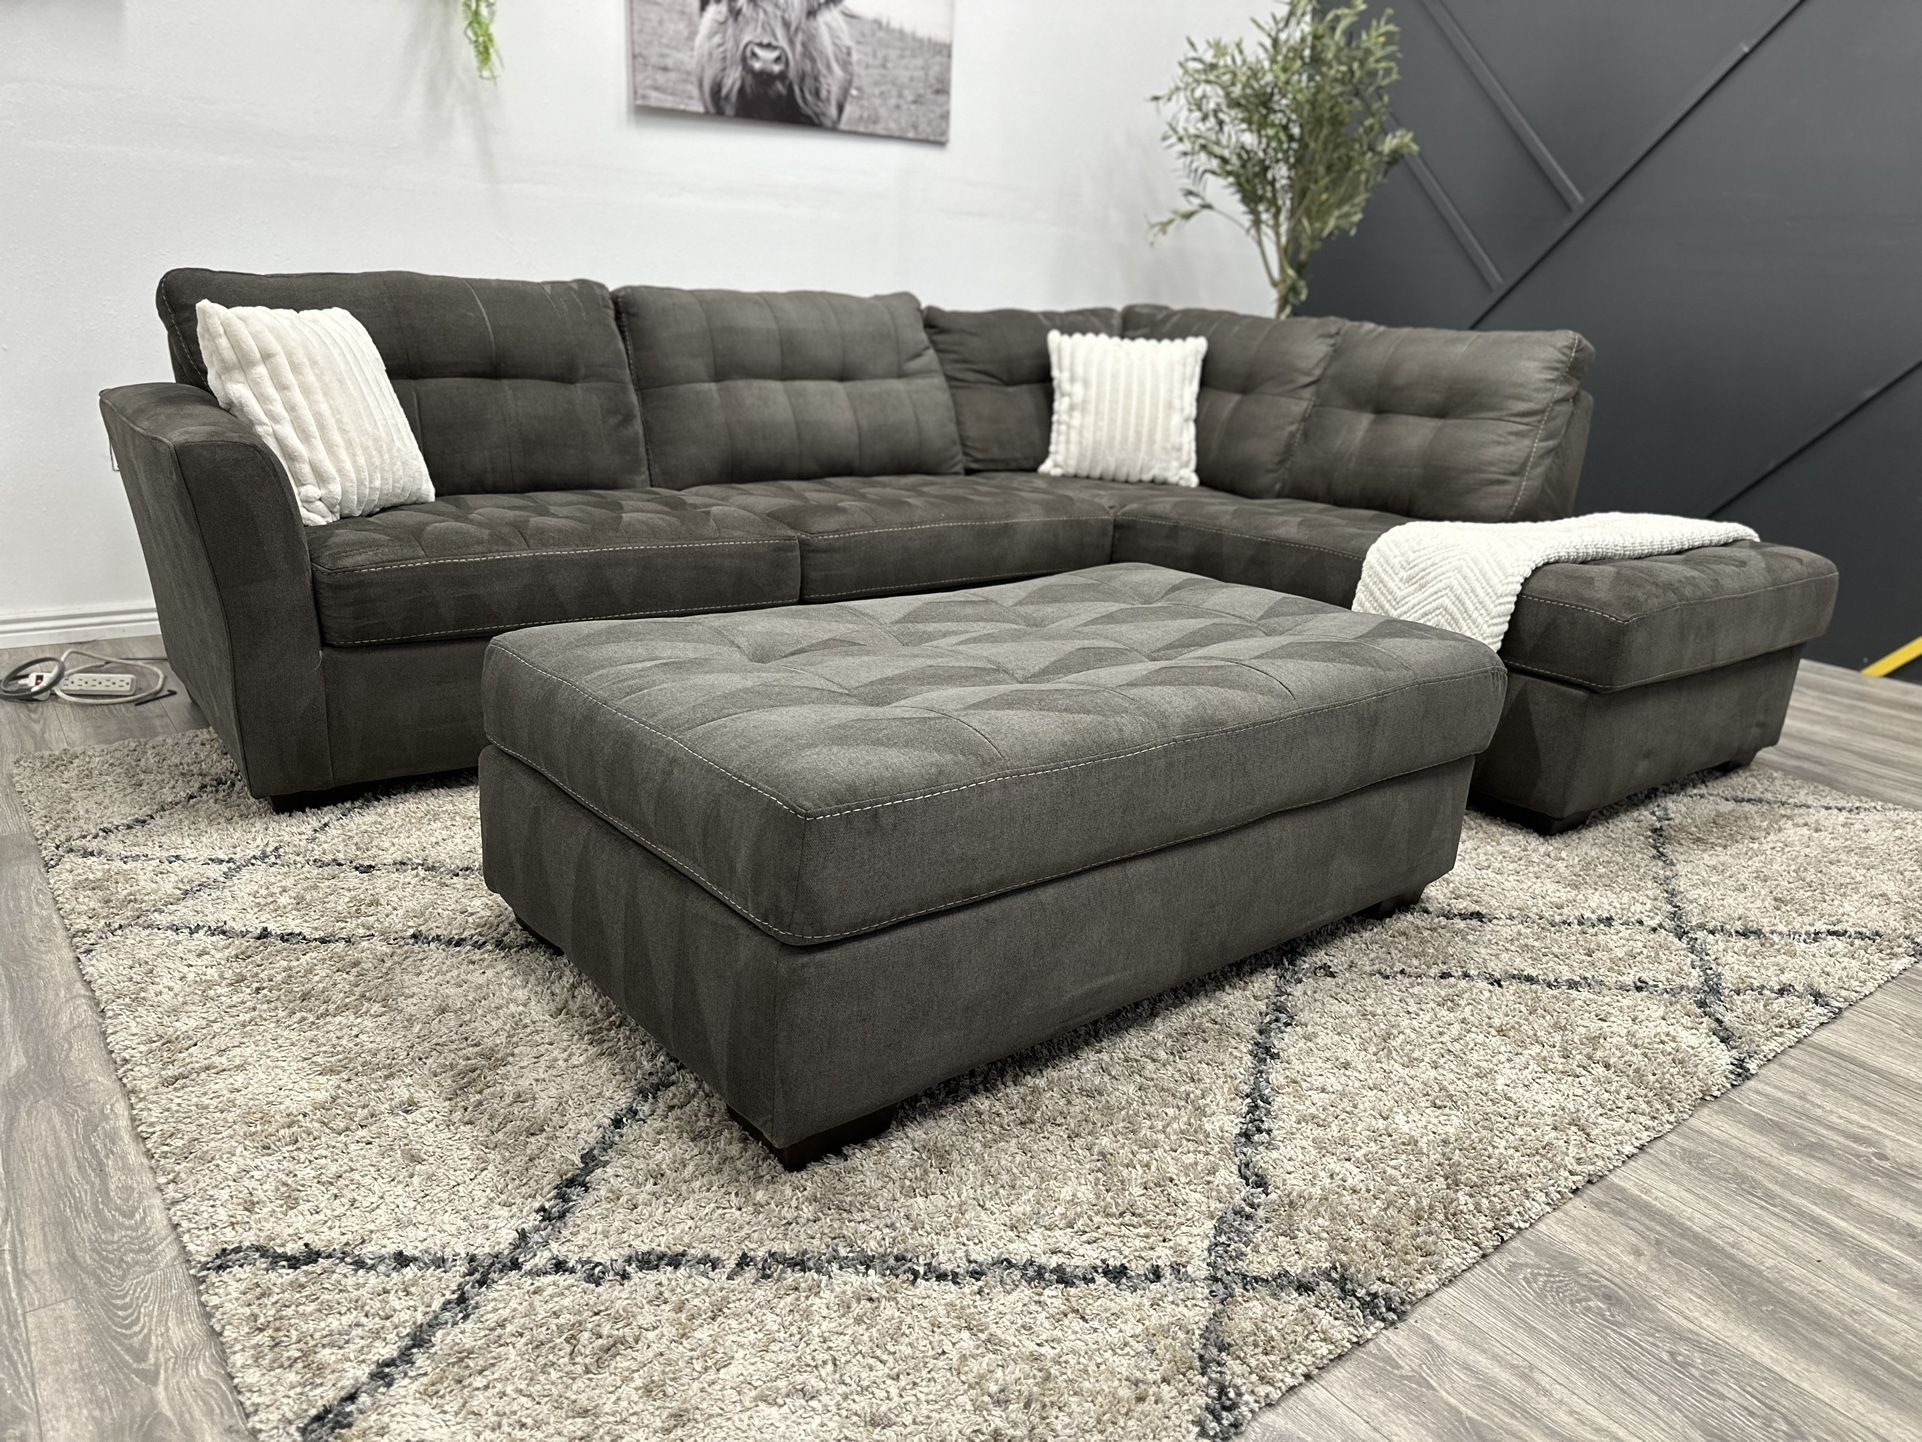 Gray Sectional Couch -Free Delivery 